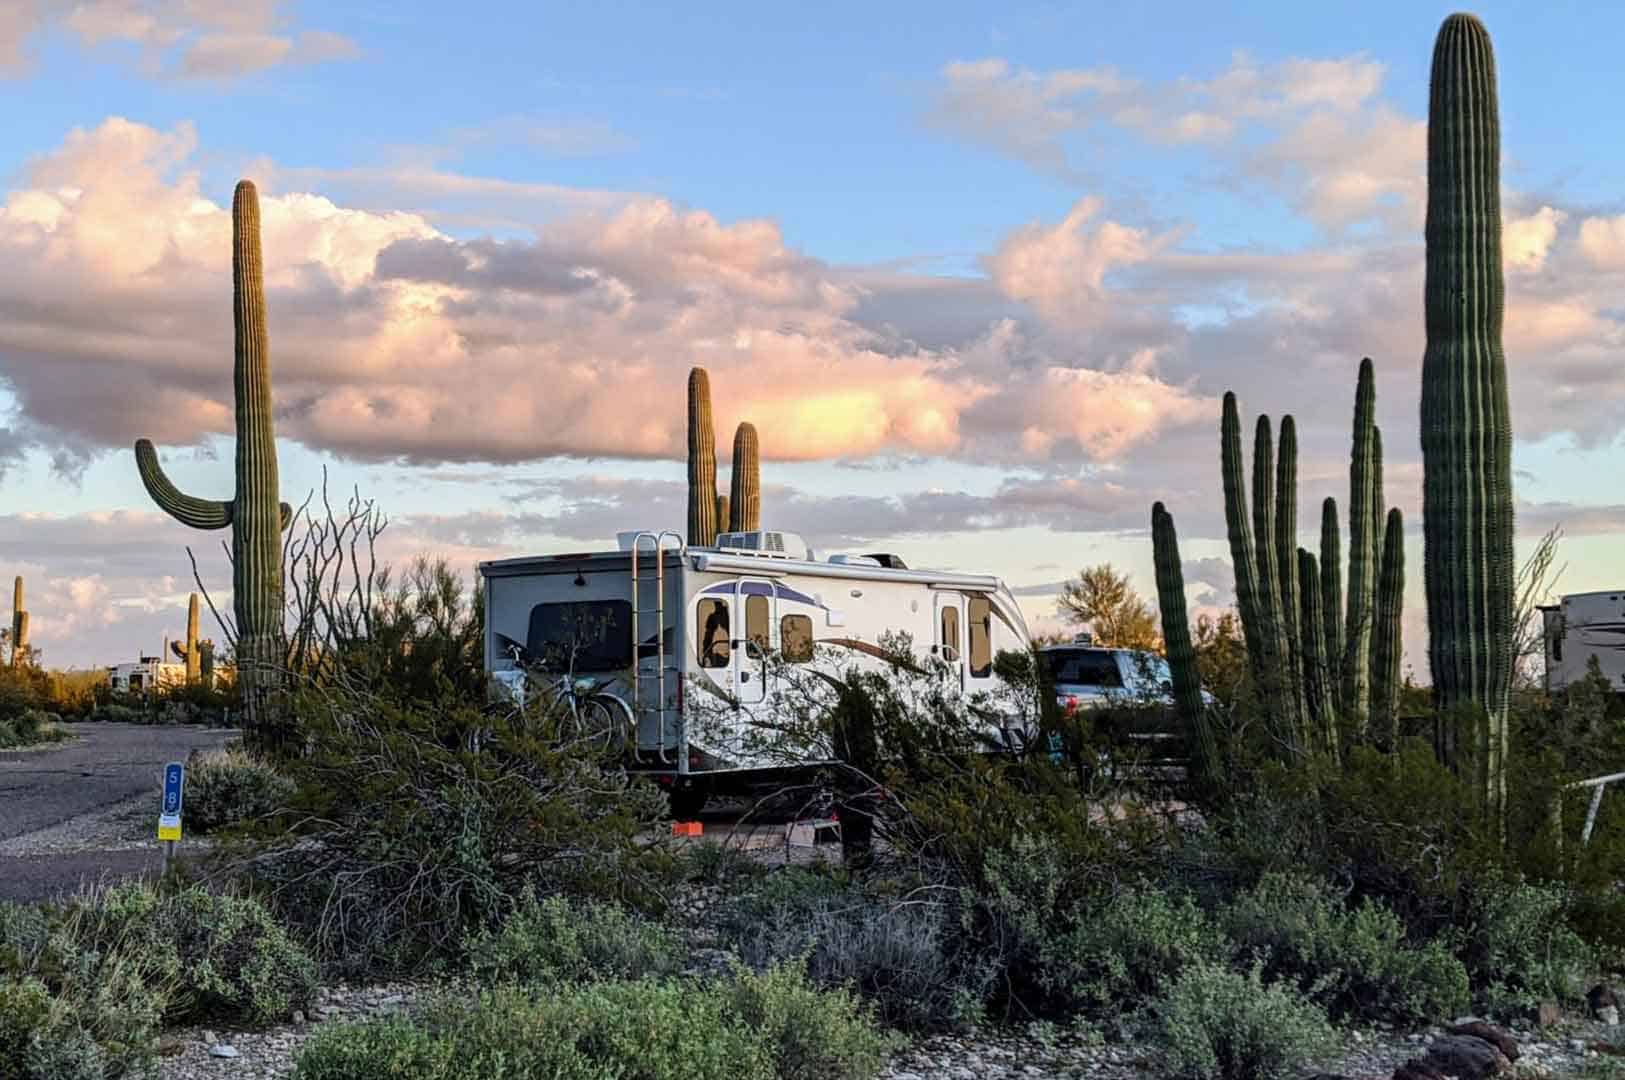 Boondocking In An RV: Important Things To Know!